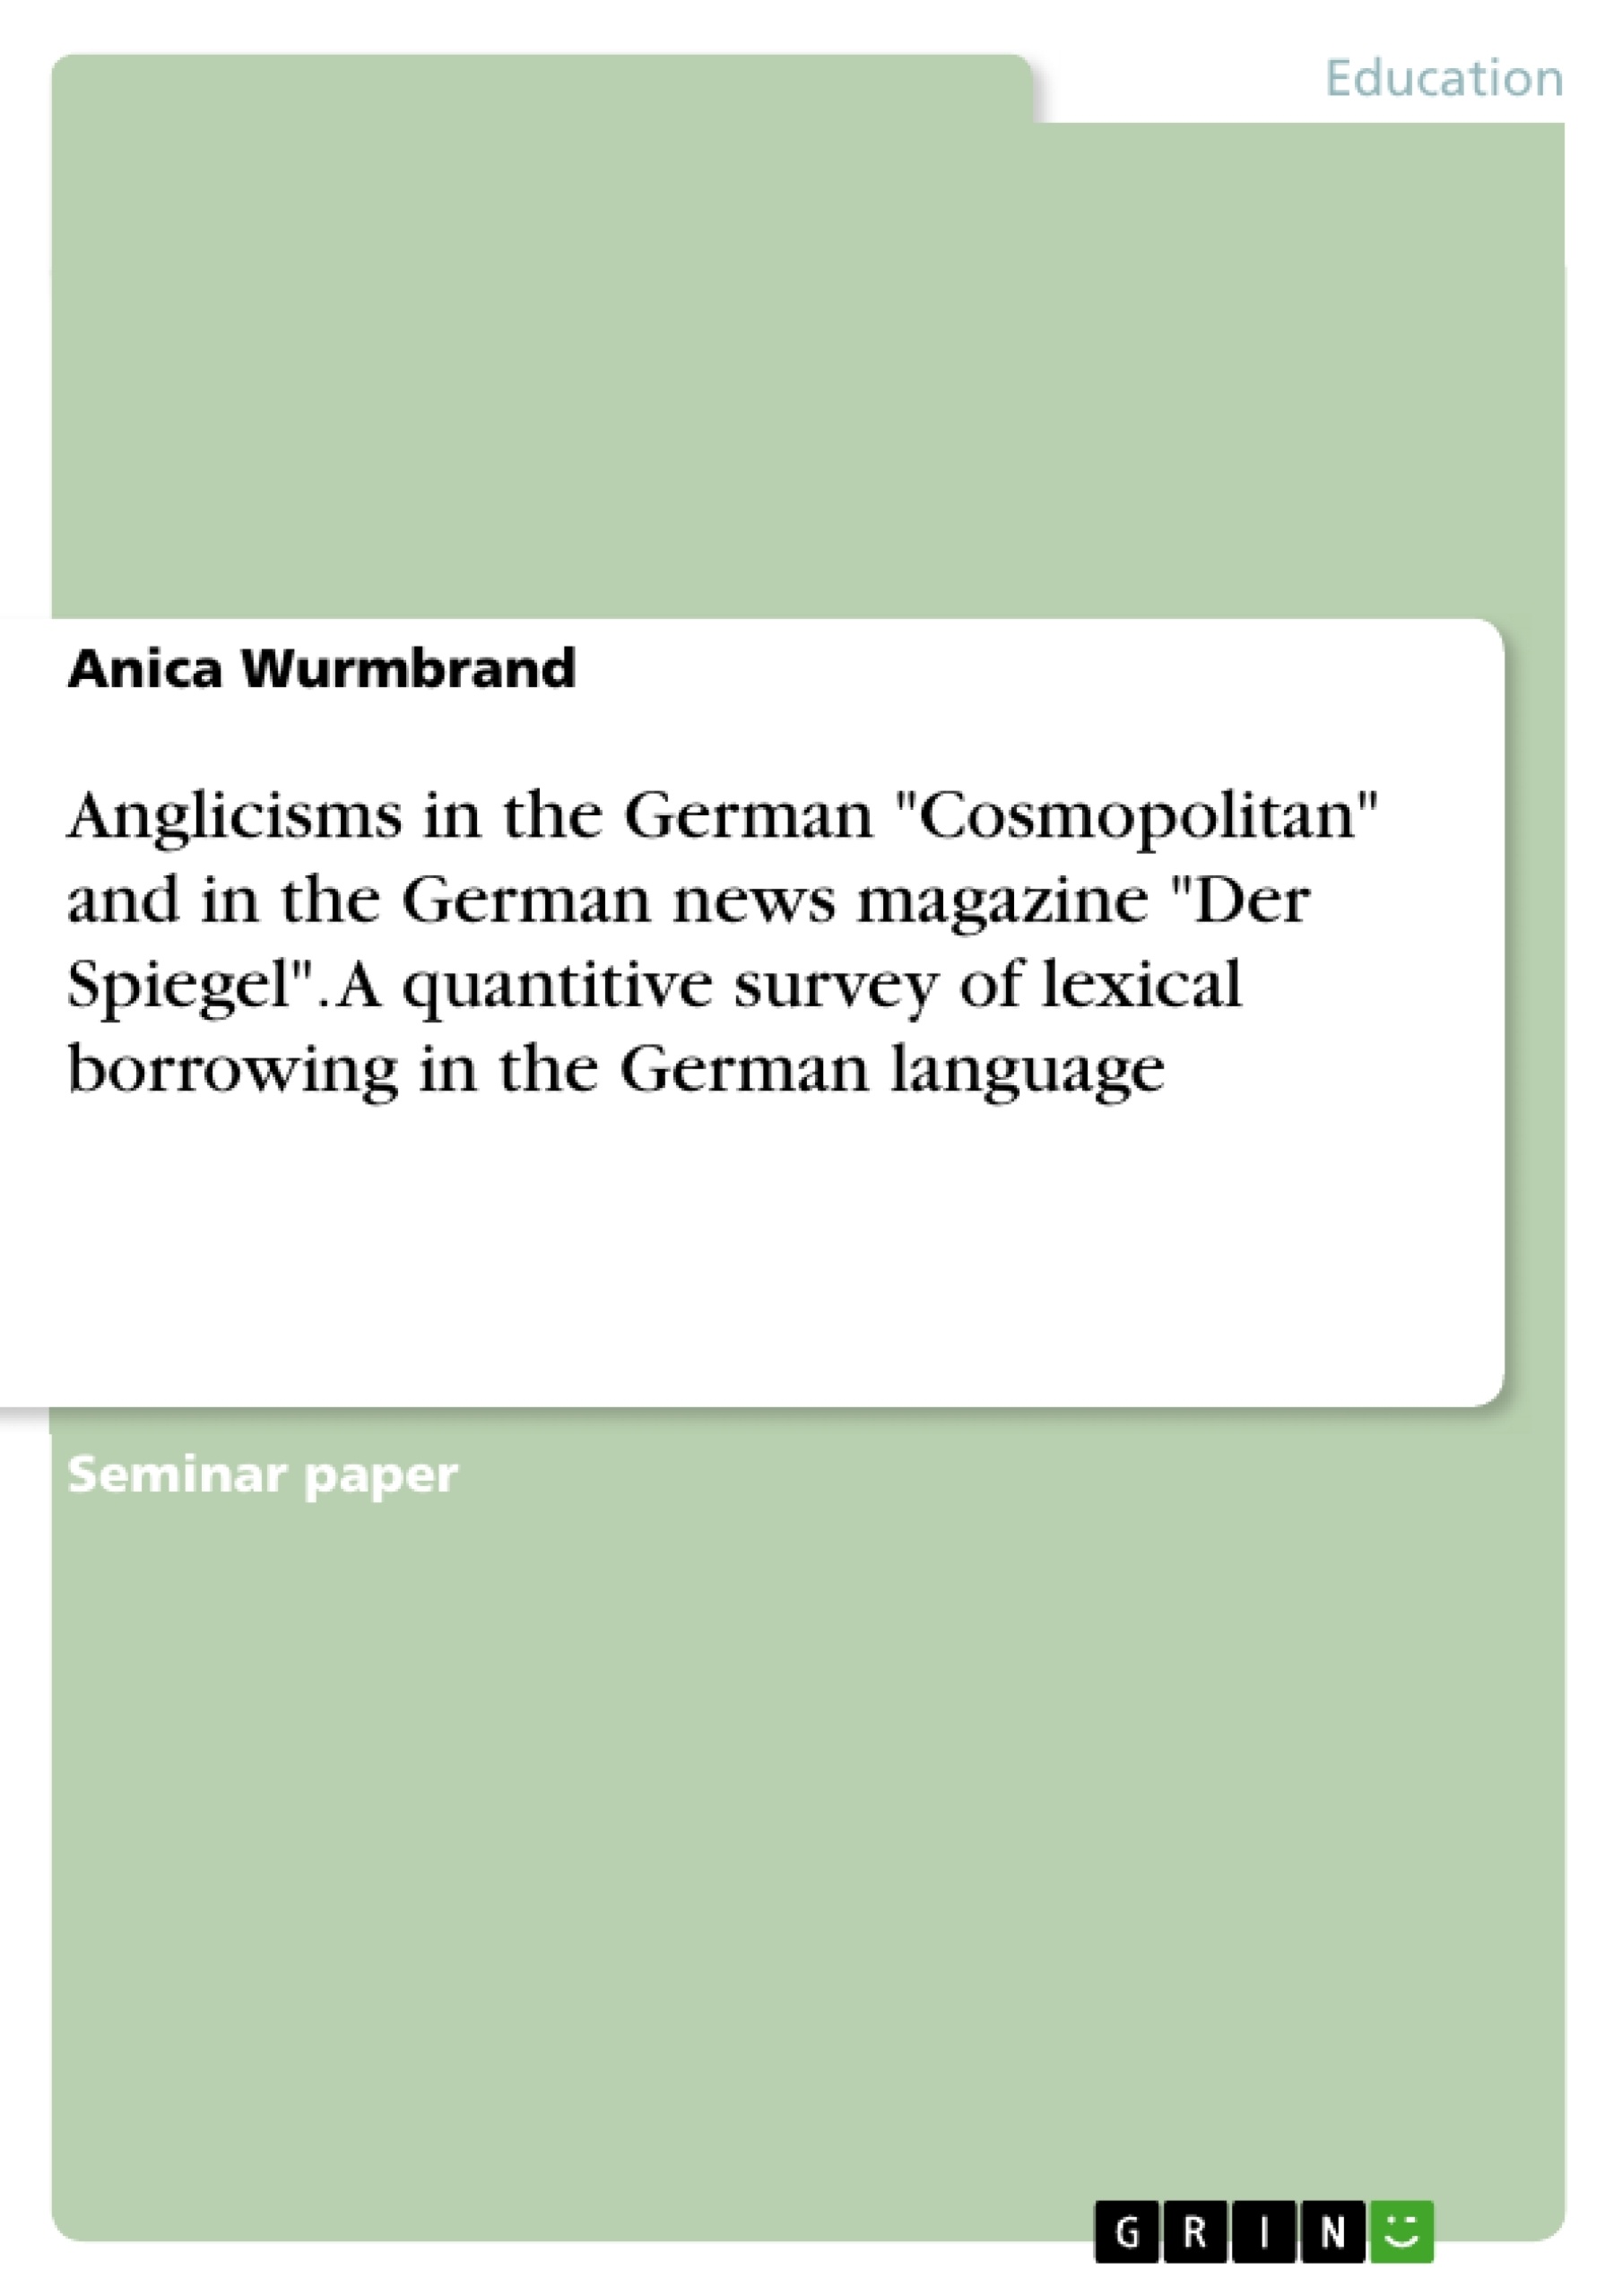 Título: Anglicisms in the German "Cosmopolitan" and in the German news magazine "Der Spiegel".  A quantitive survey of lexical borrowing in the German language